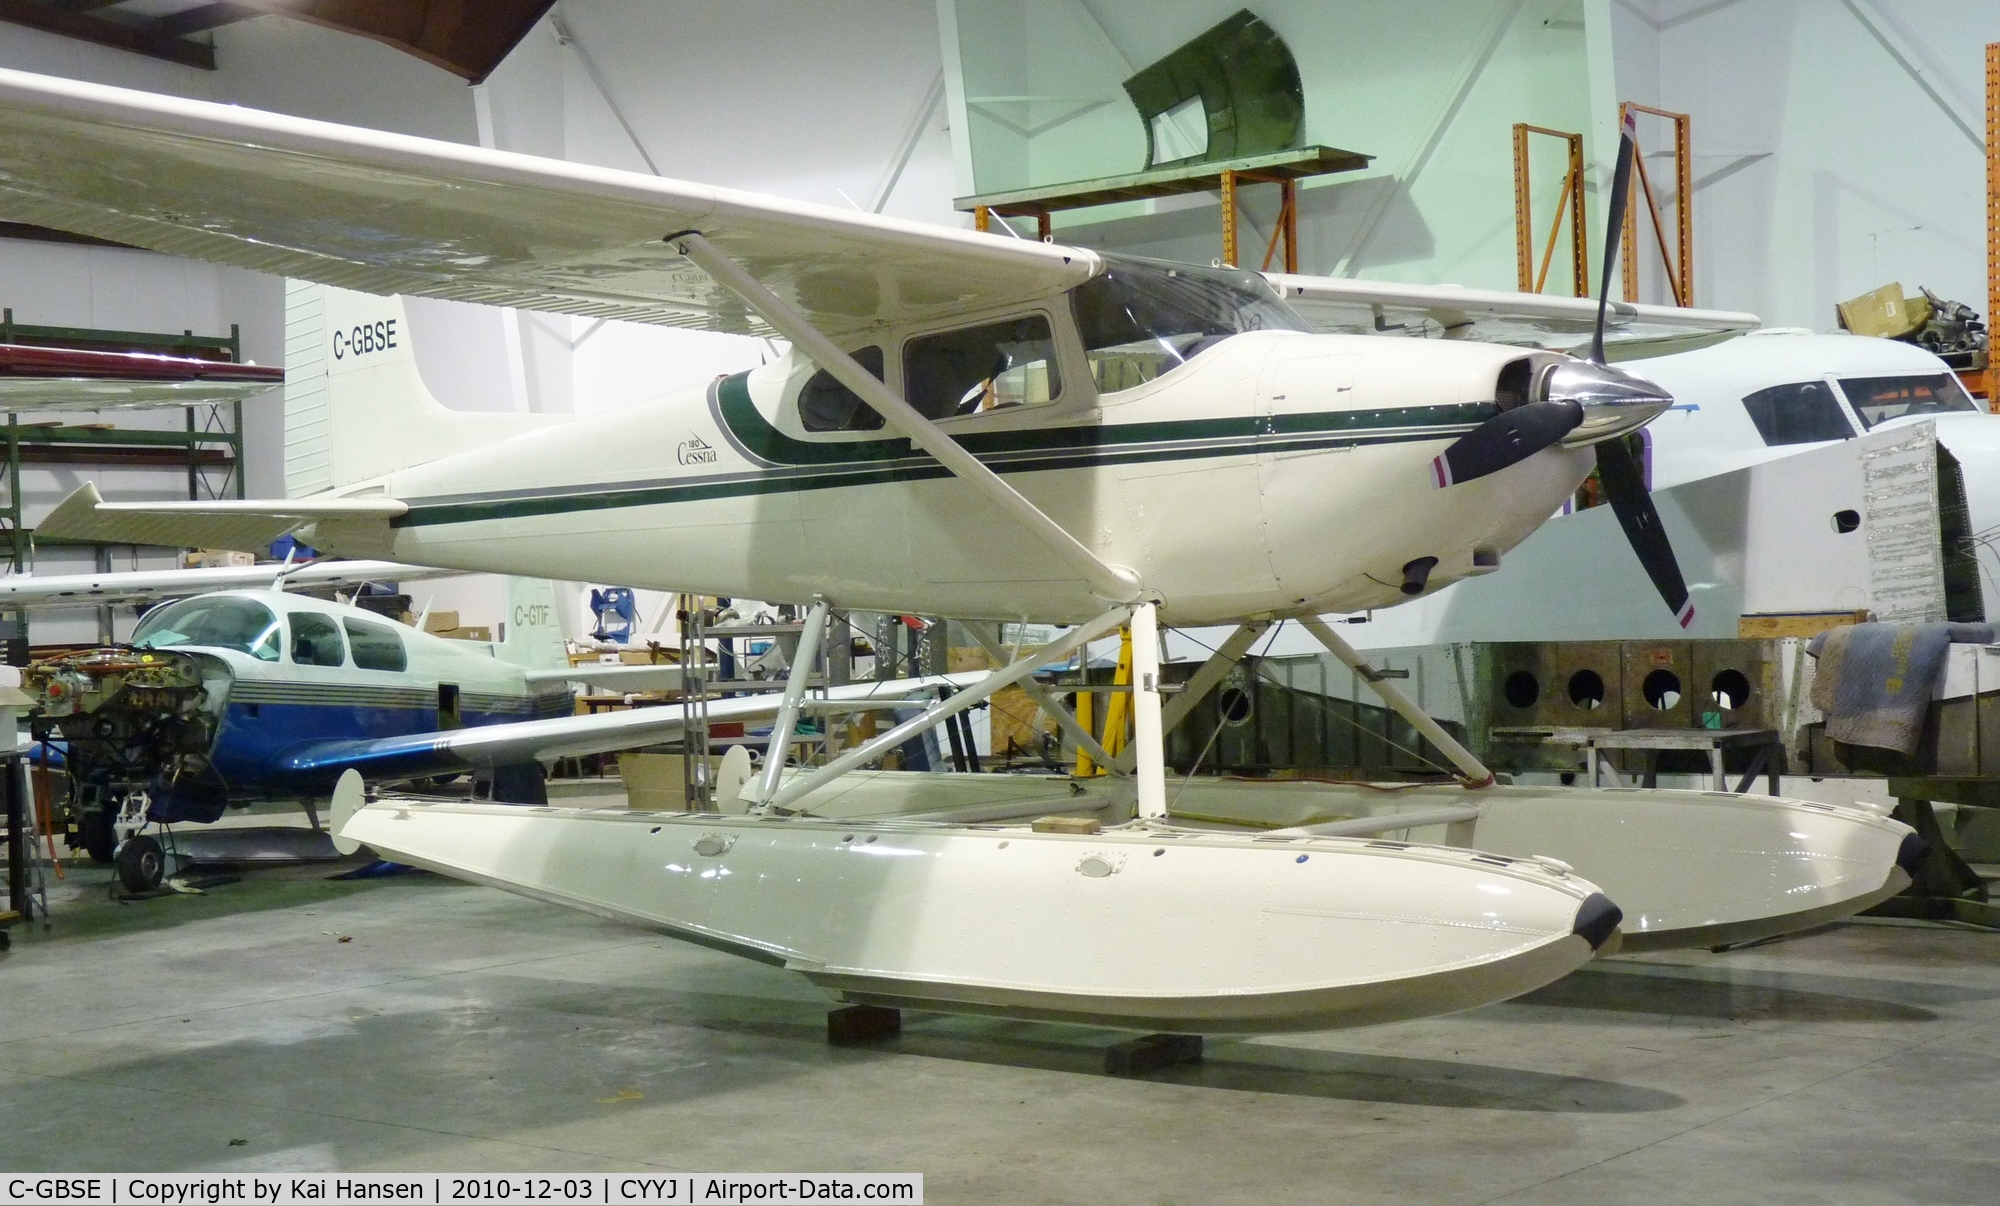 C-GBSE, 1954 Cessna 180 C/N 31189, After a new paint job.